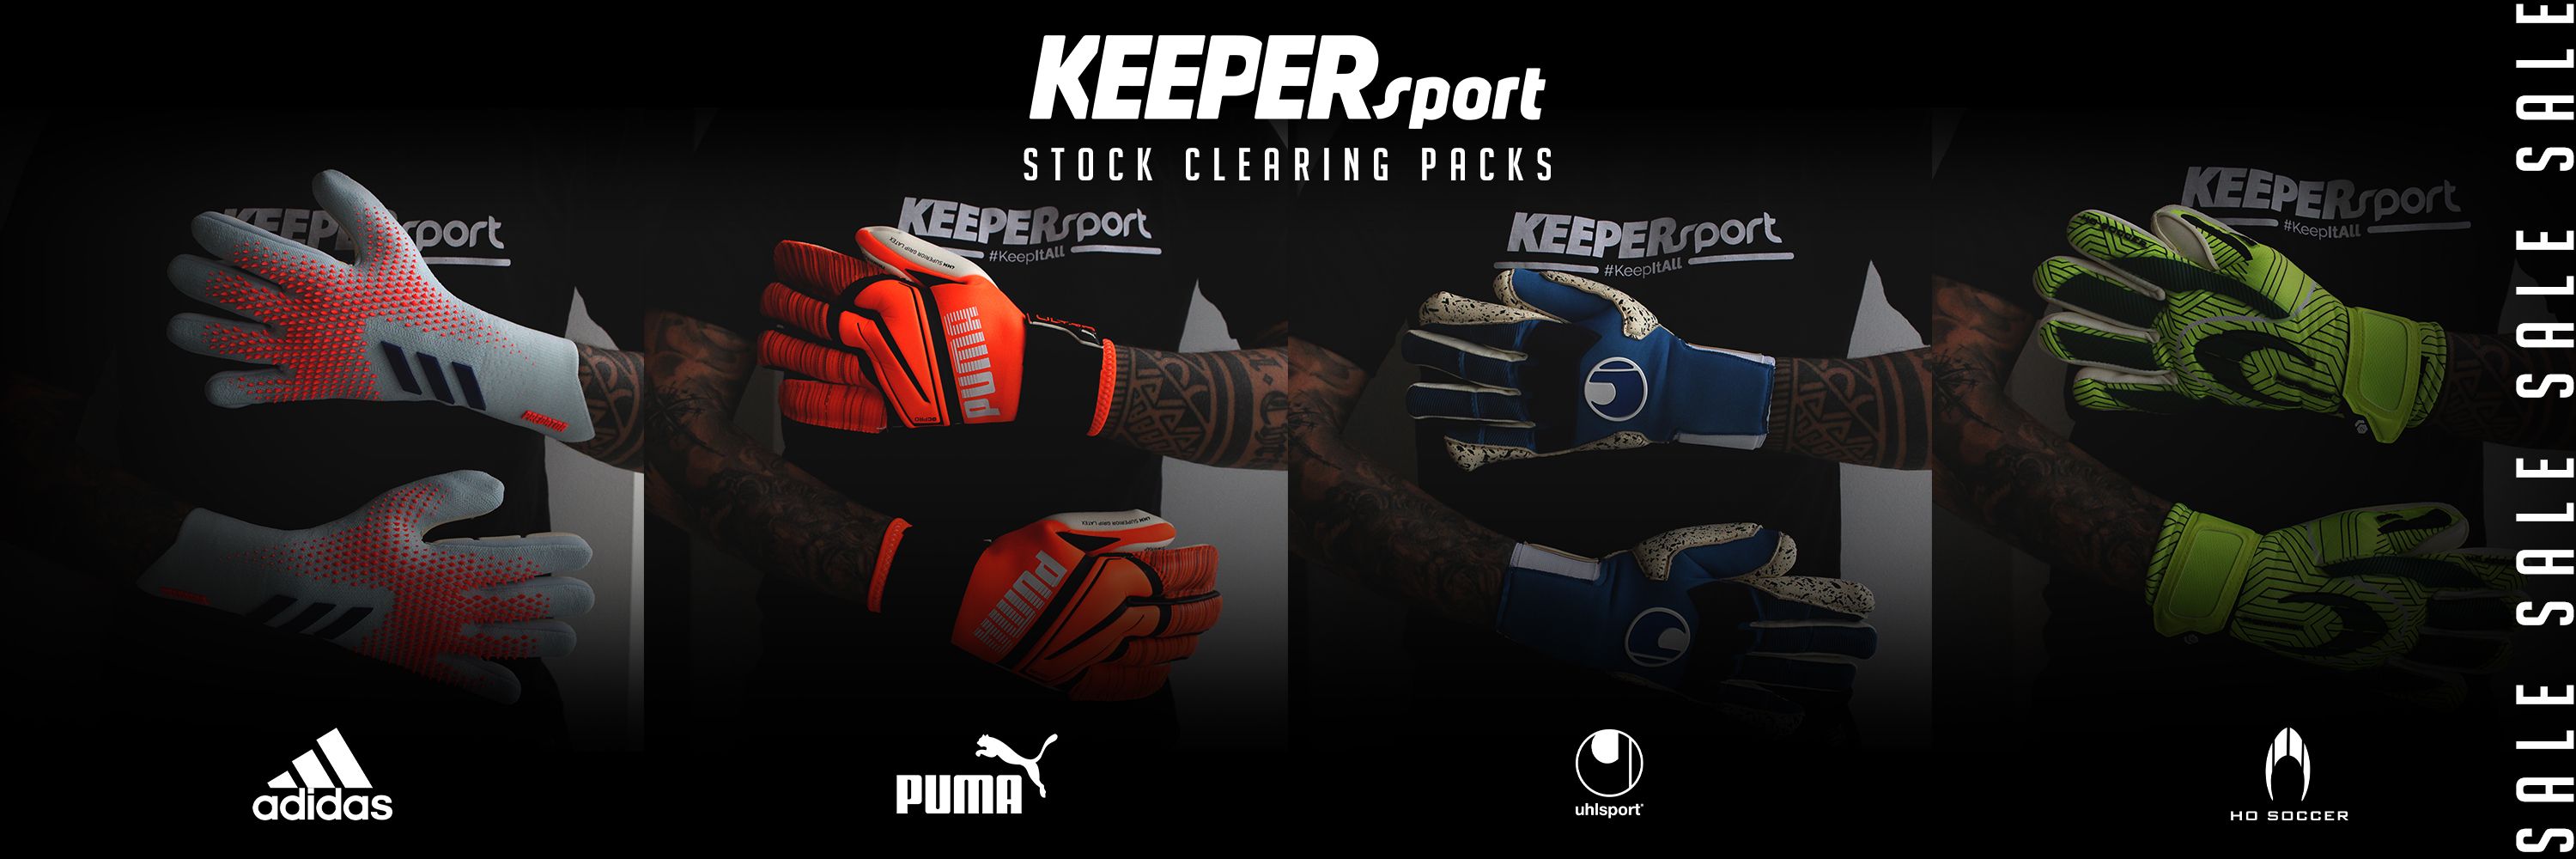 On clean le stock chez KEEPERsport